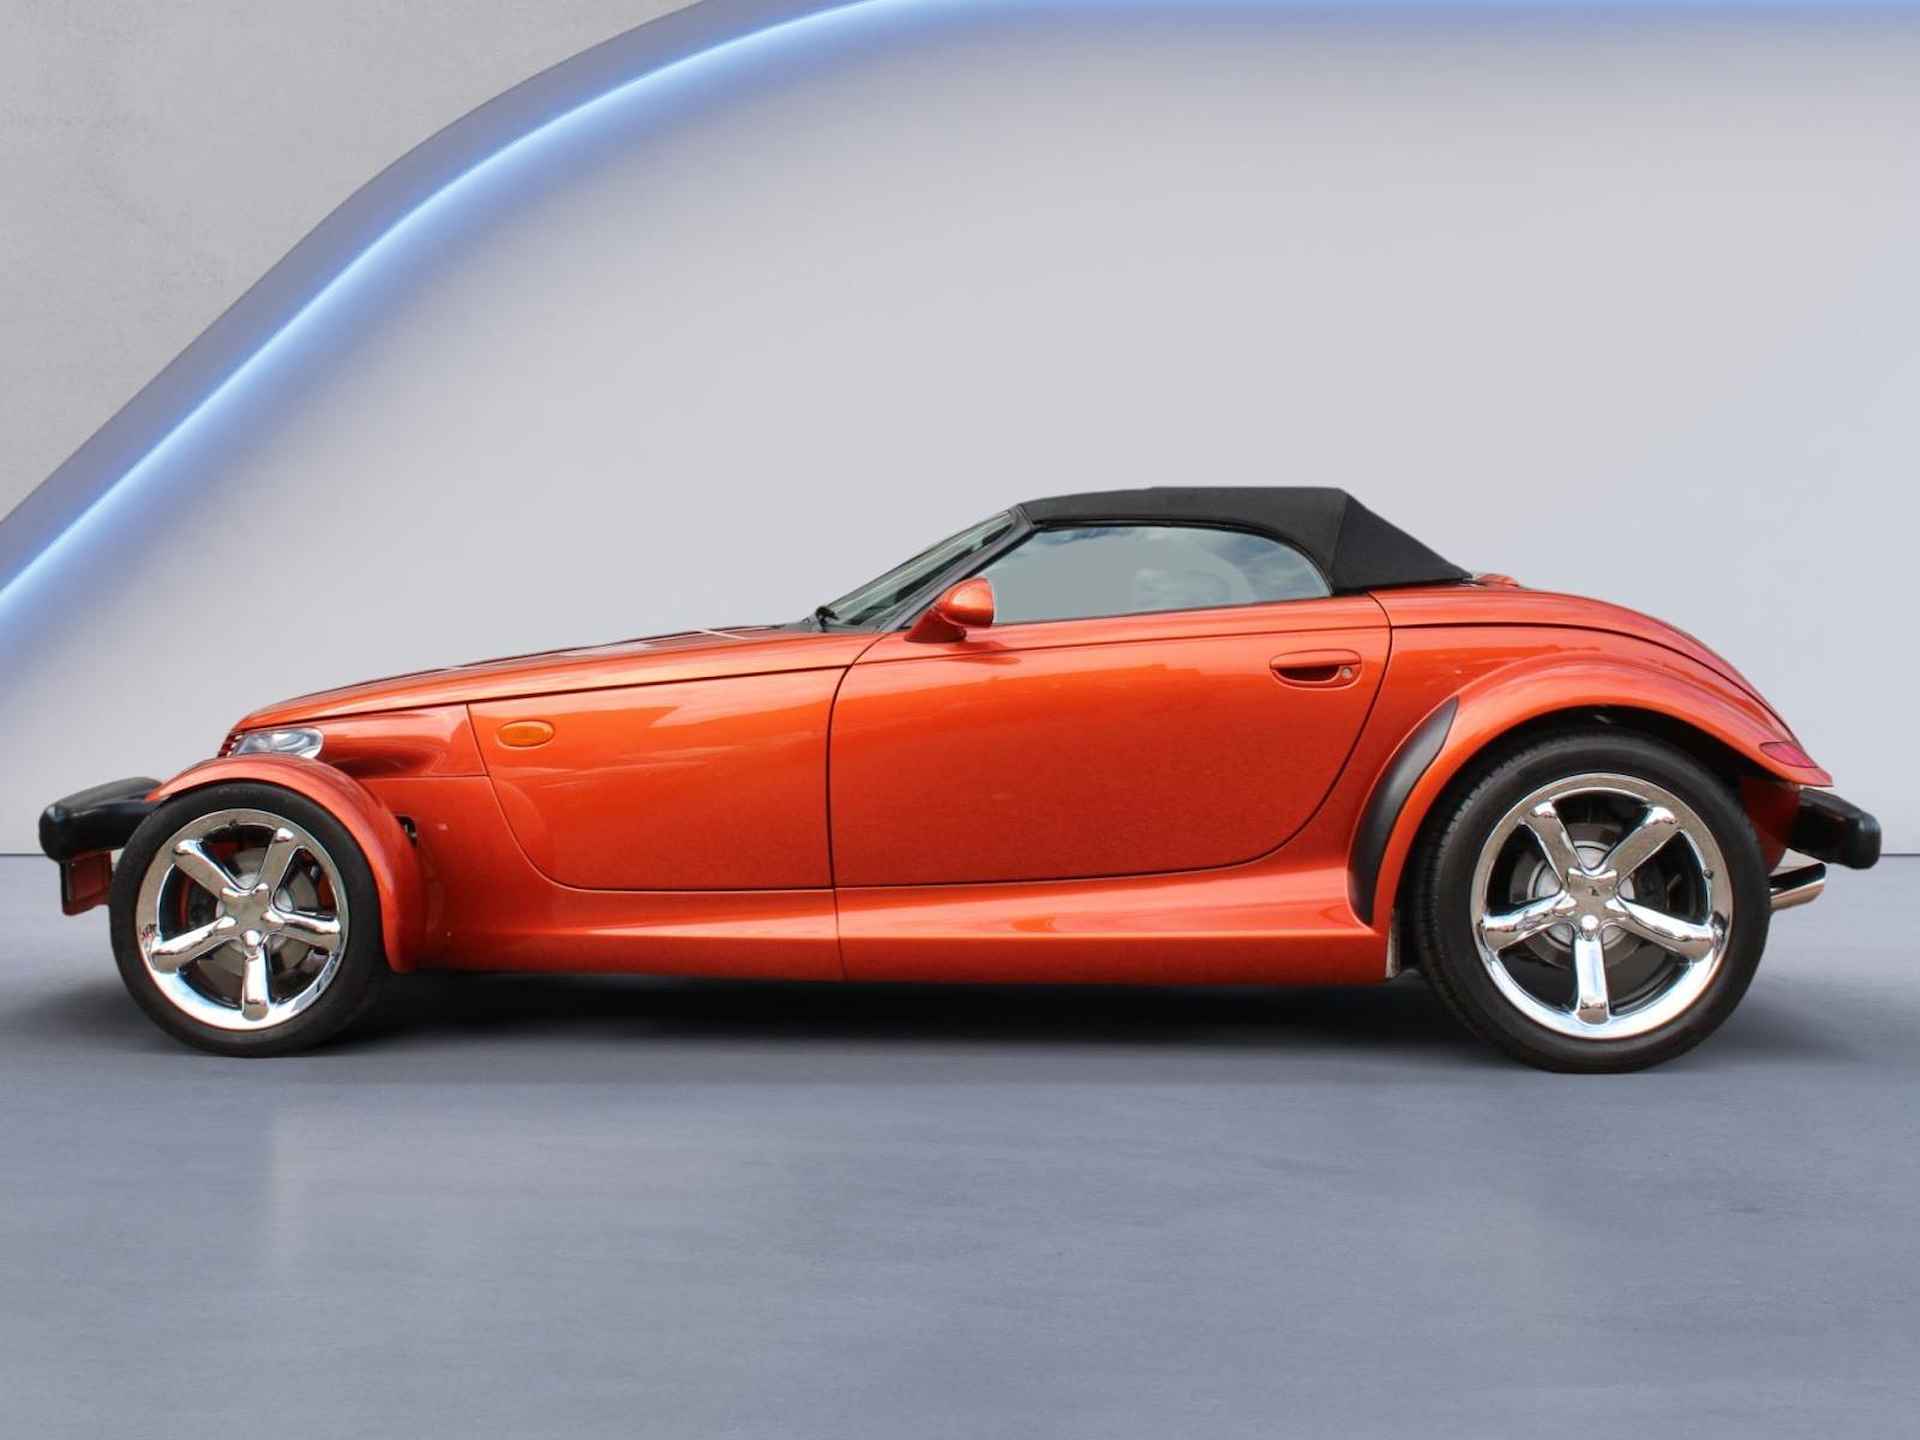 Plymouth Prowler Automaat 3.5i-V6 Youngtimer Nieuwe Cabriokap, Wind scherm Auto is in Concoursstaat. - 3/17